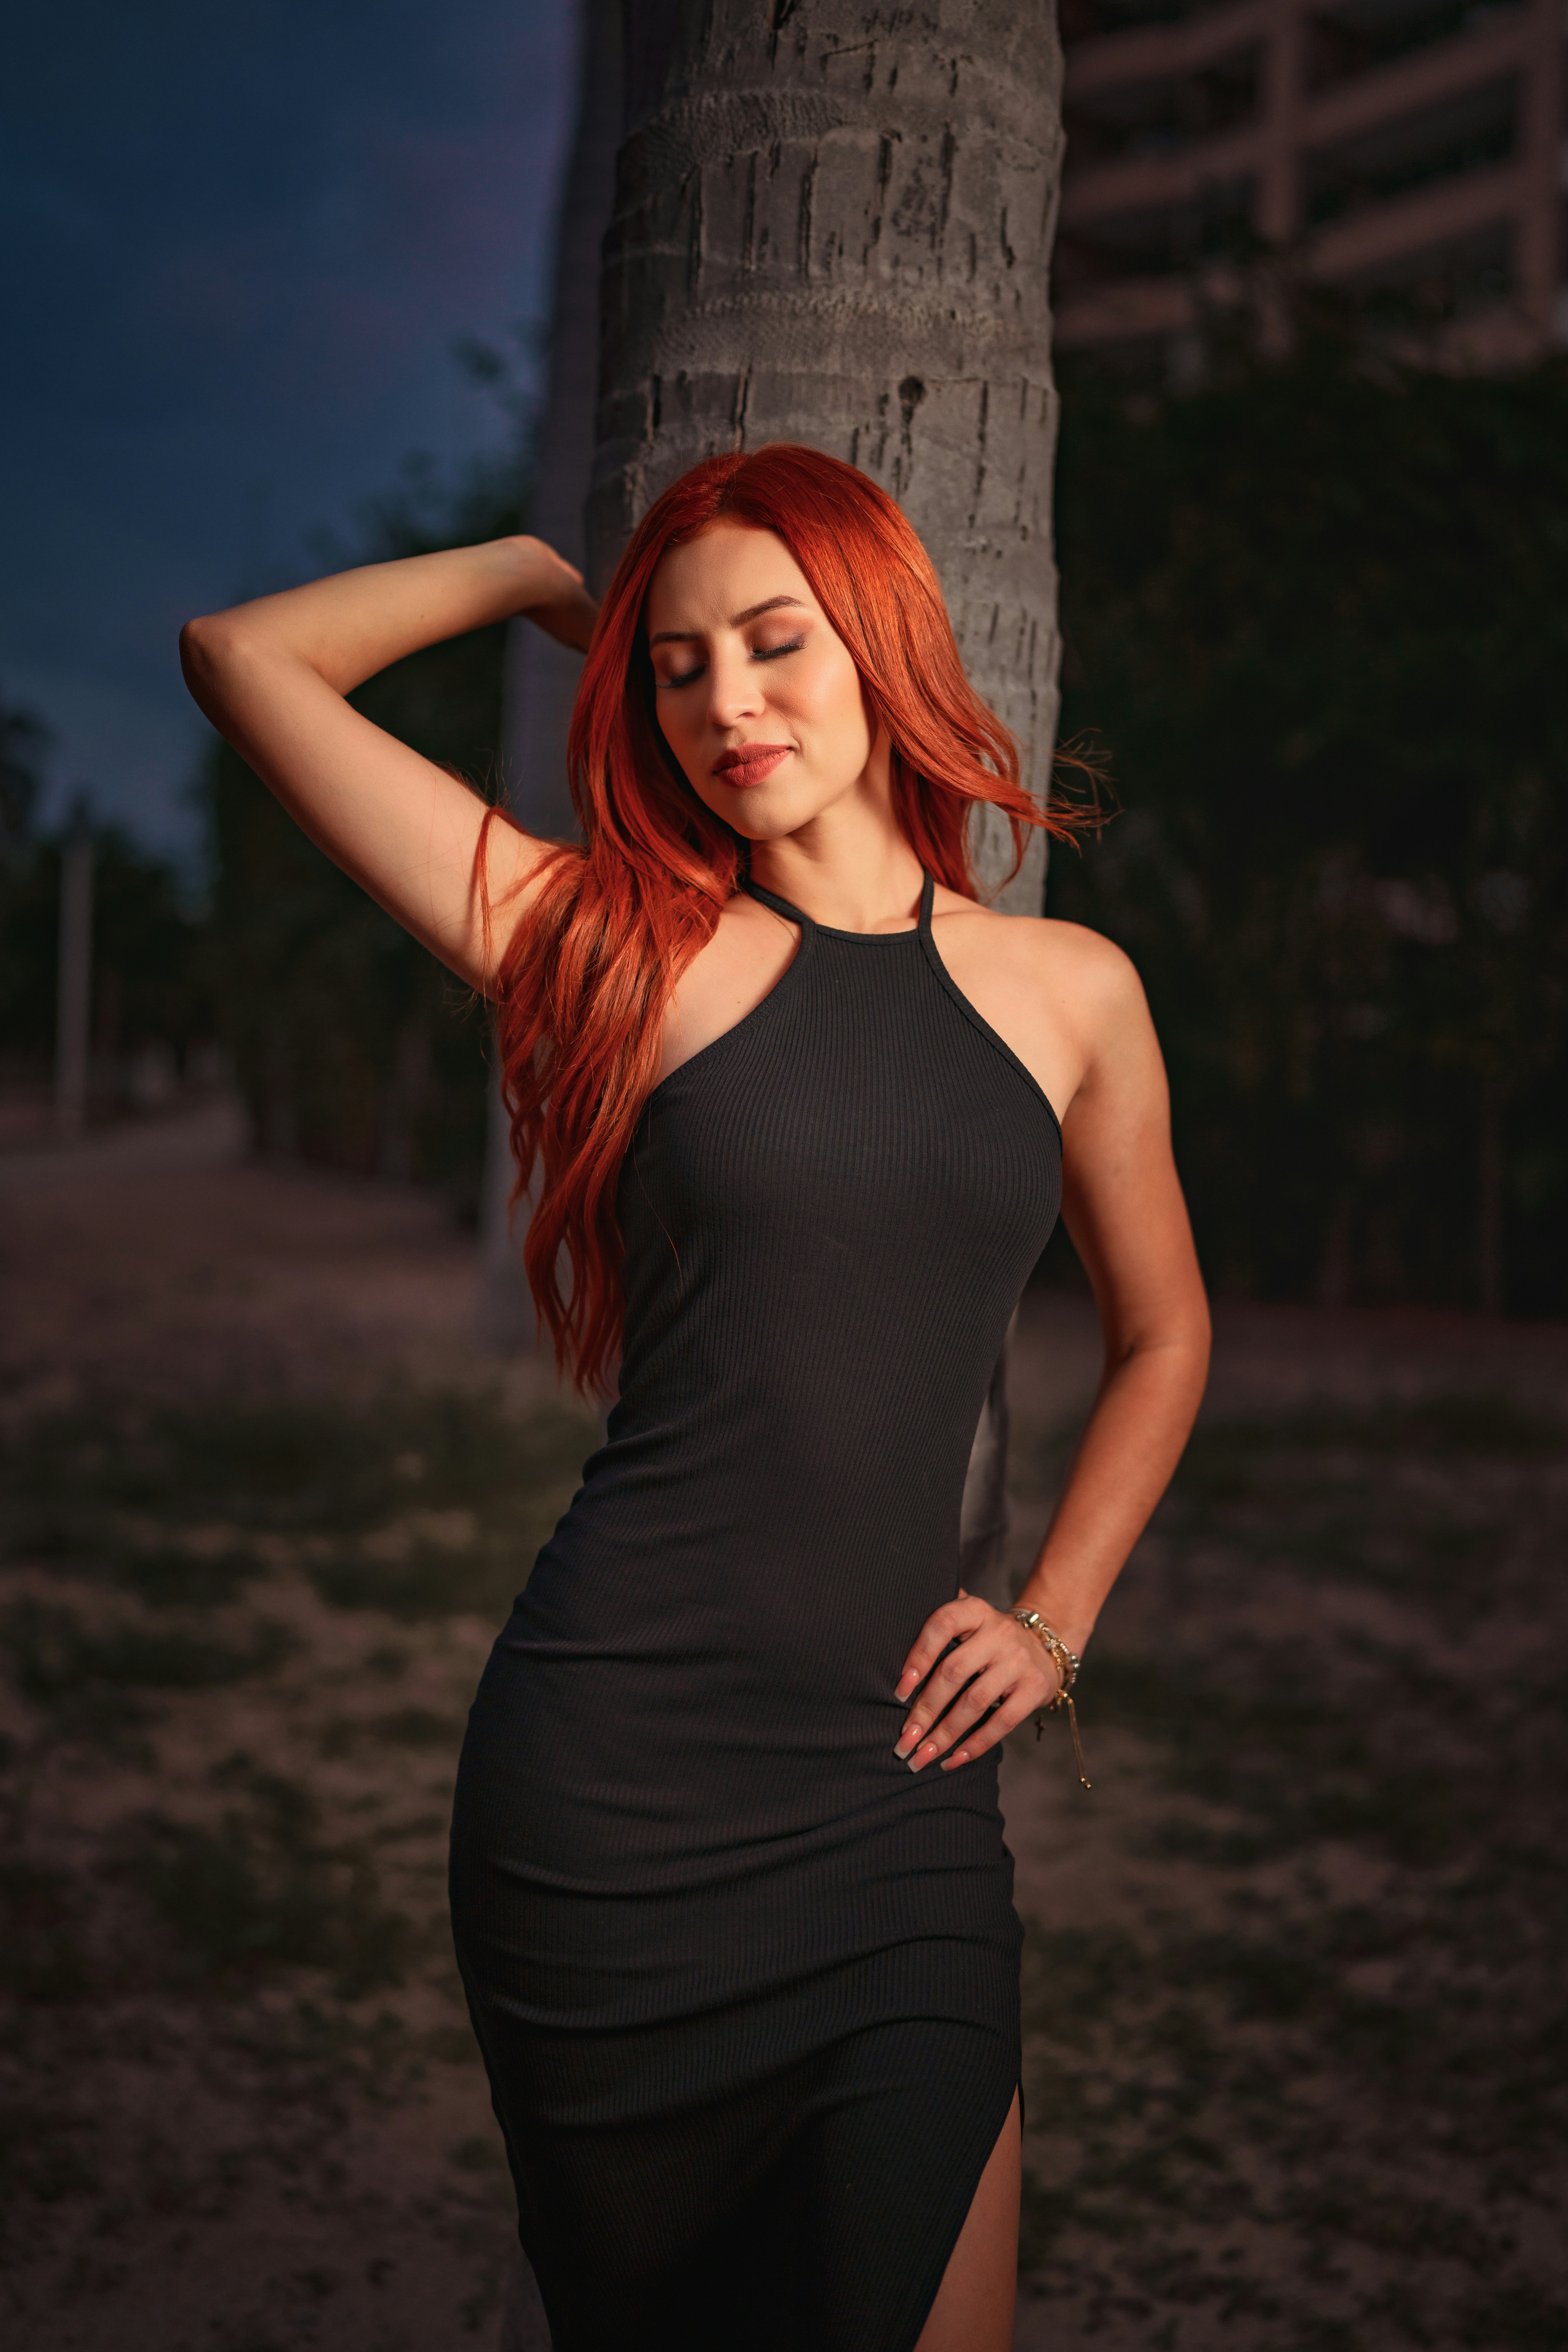 A beautiful portrait of a redhead model at the beach wearing a black dress taken at sunset